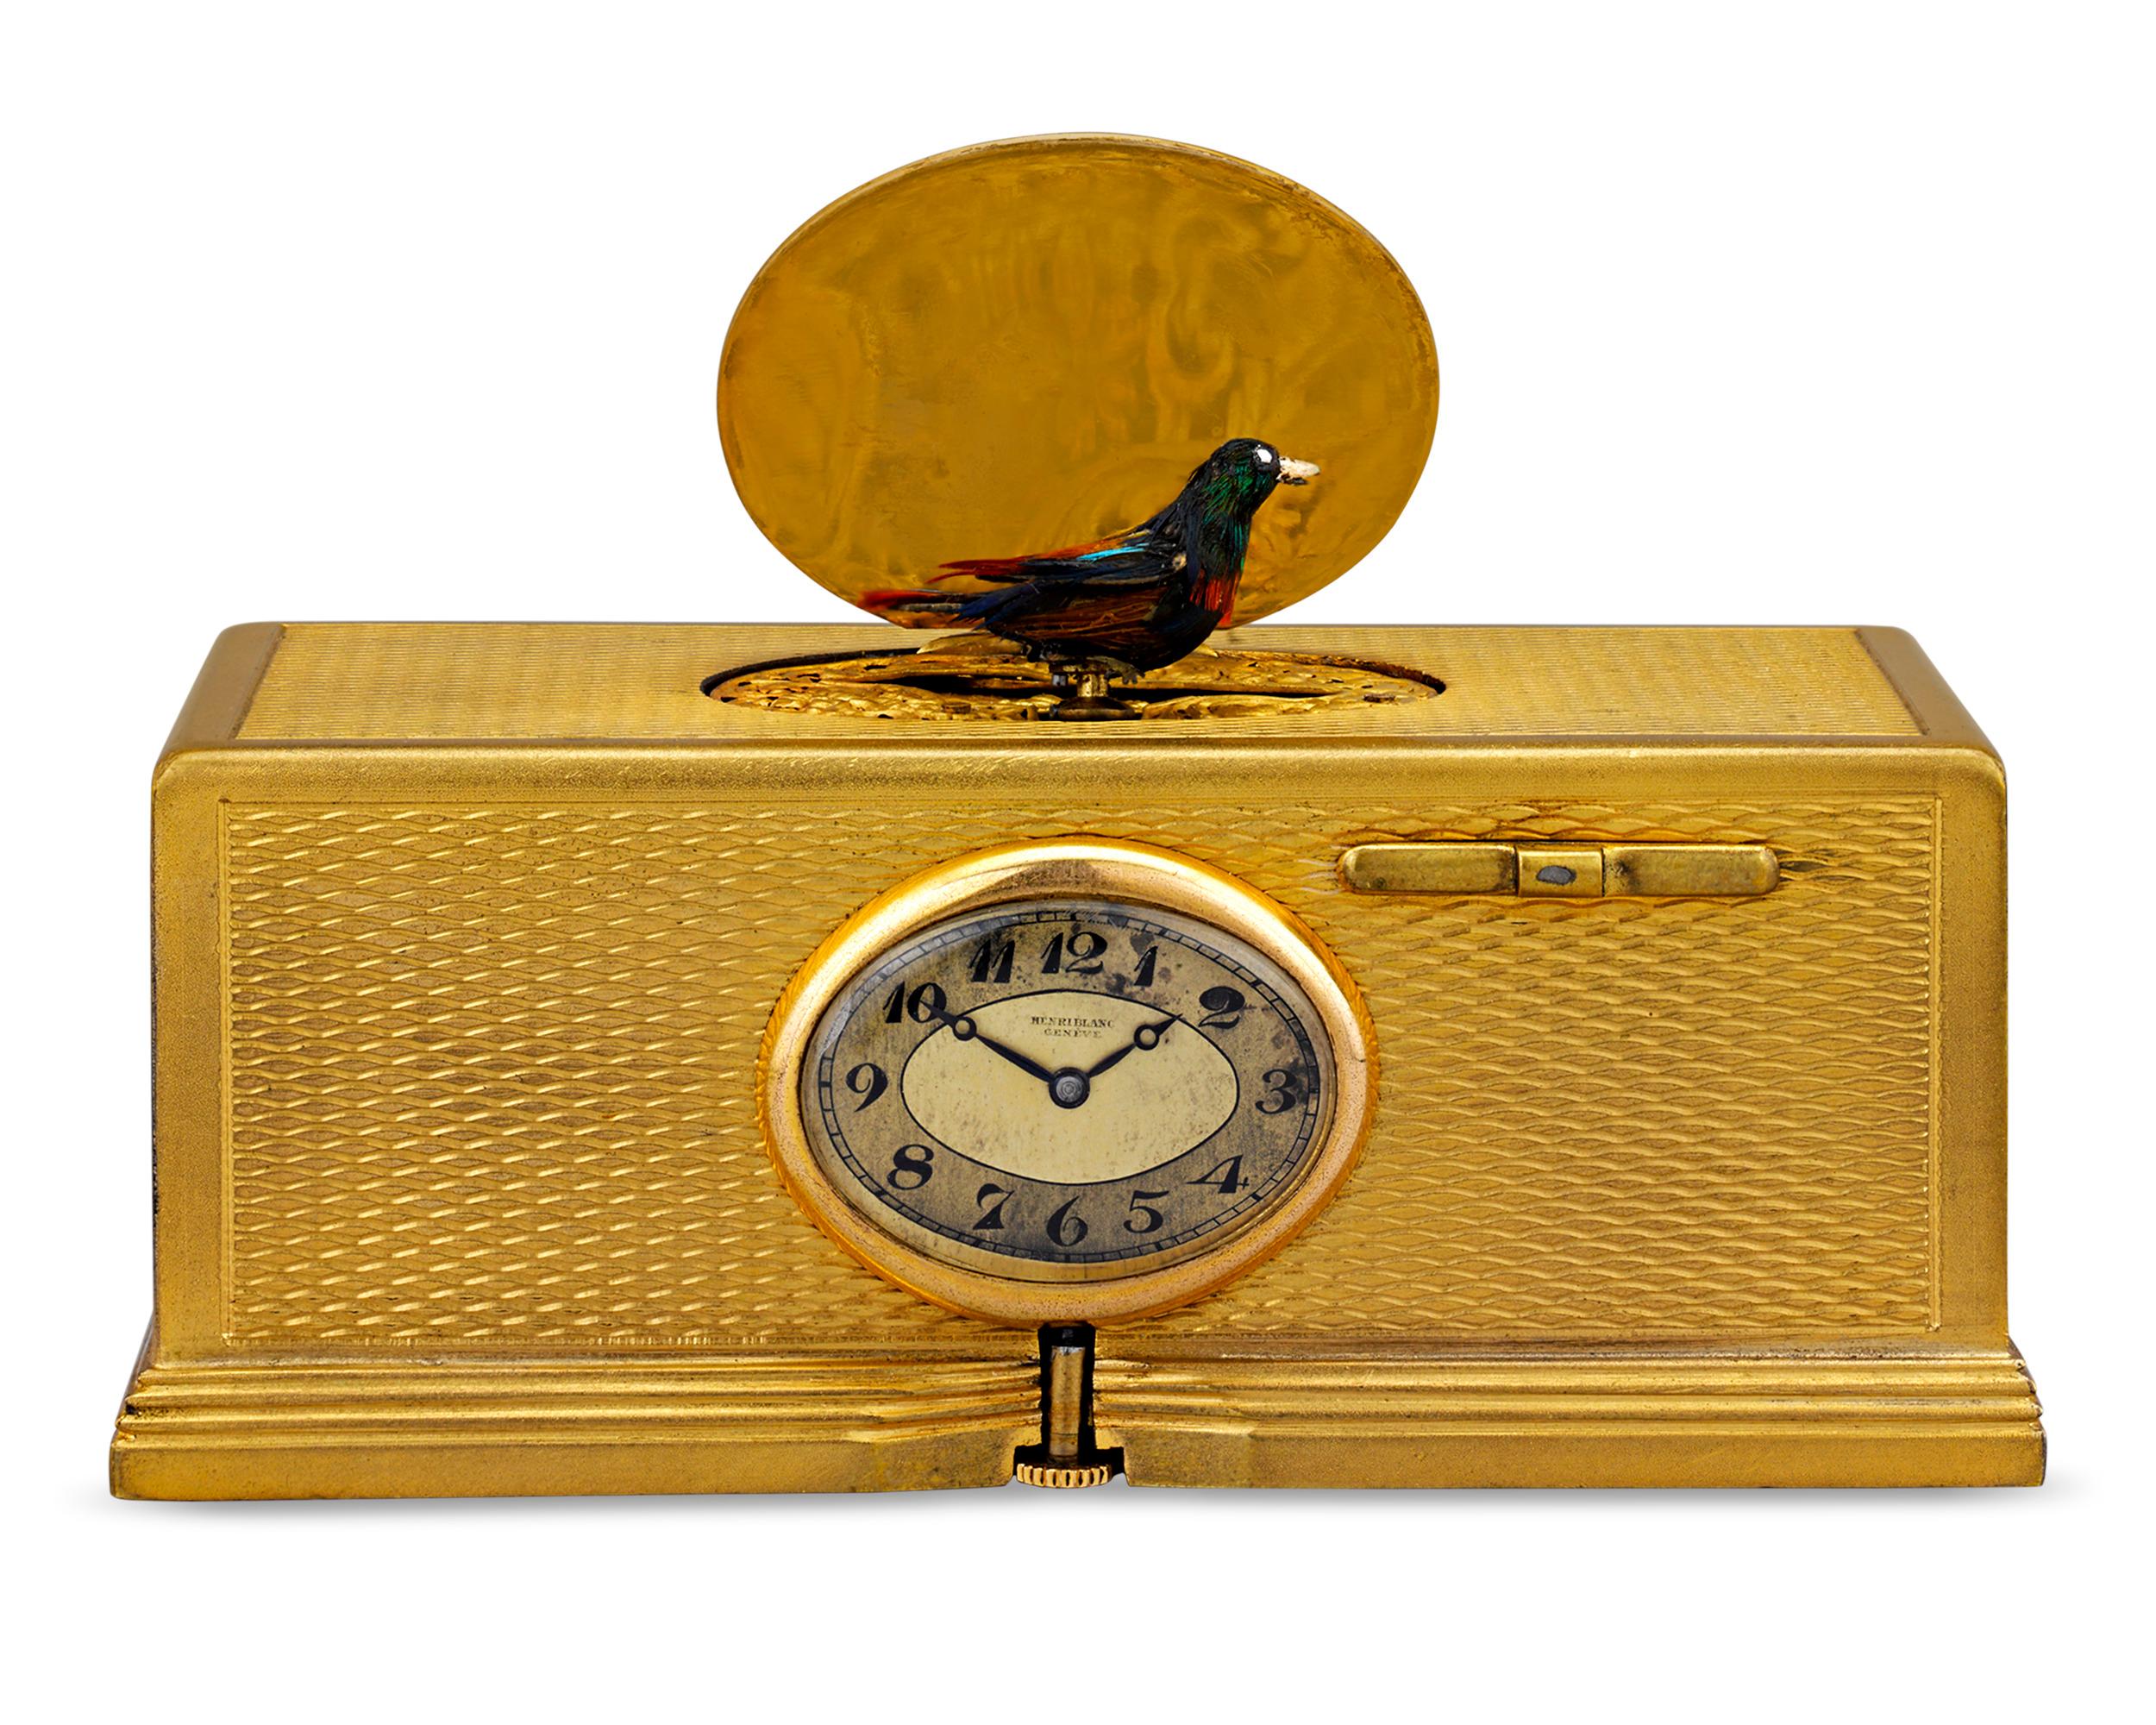 Other Gold-Plated Singing Bird Box and Clock